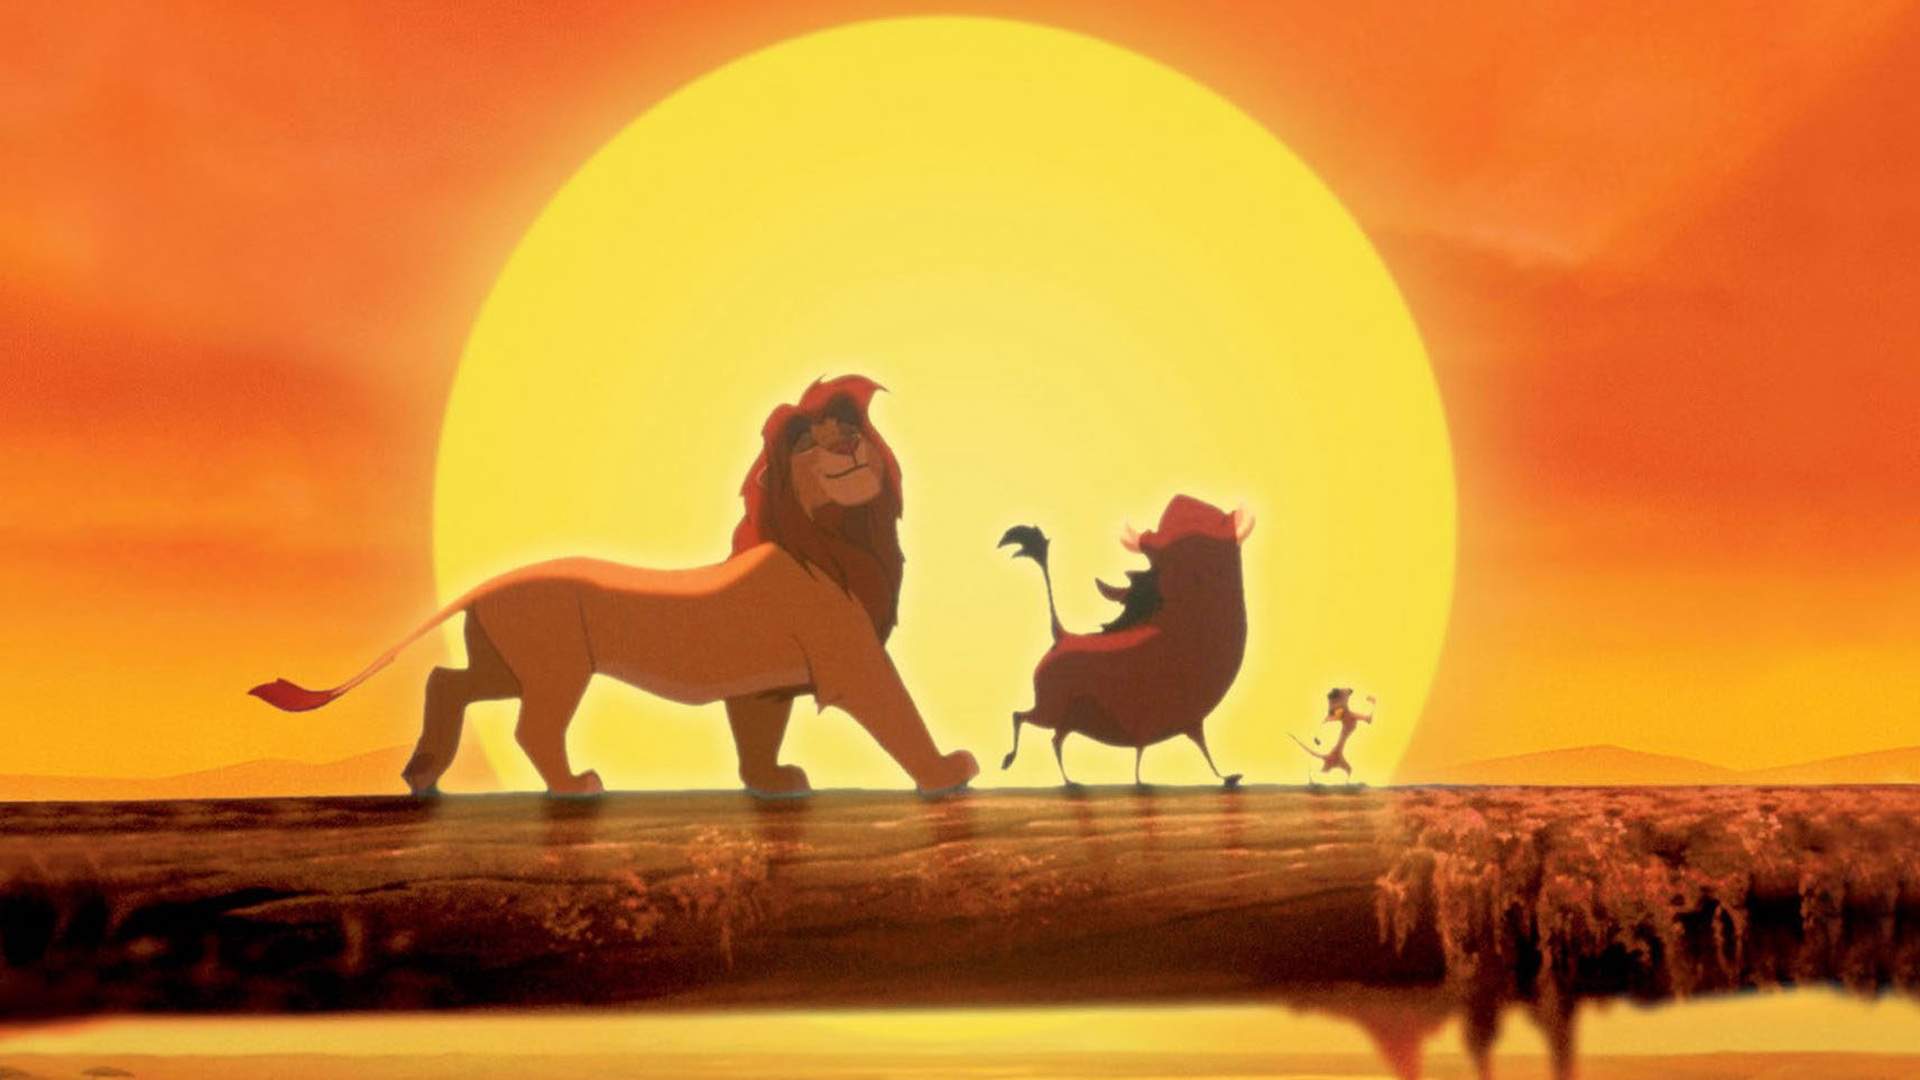 Sing Along Versions Of 'The Lion King' And 'Beauty And The Beast' Will Hit Disney+ In August